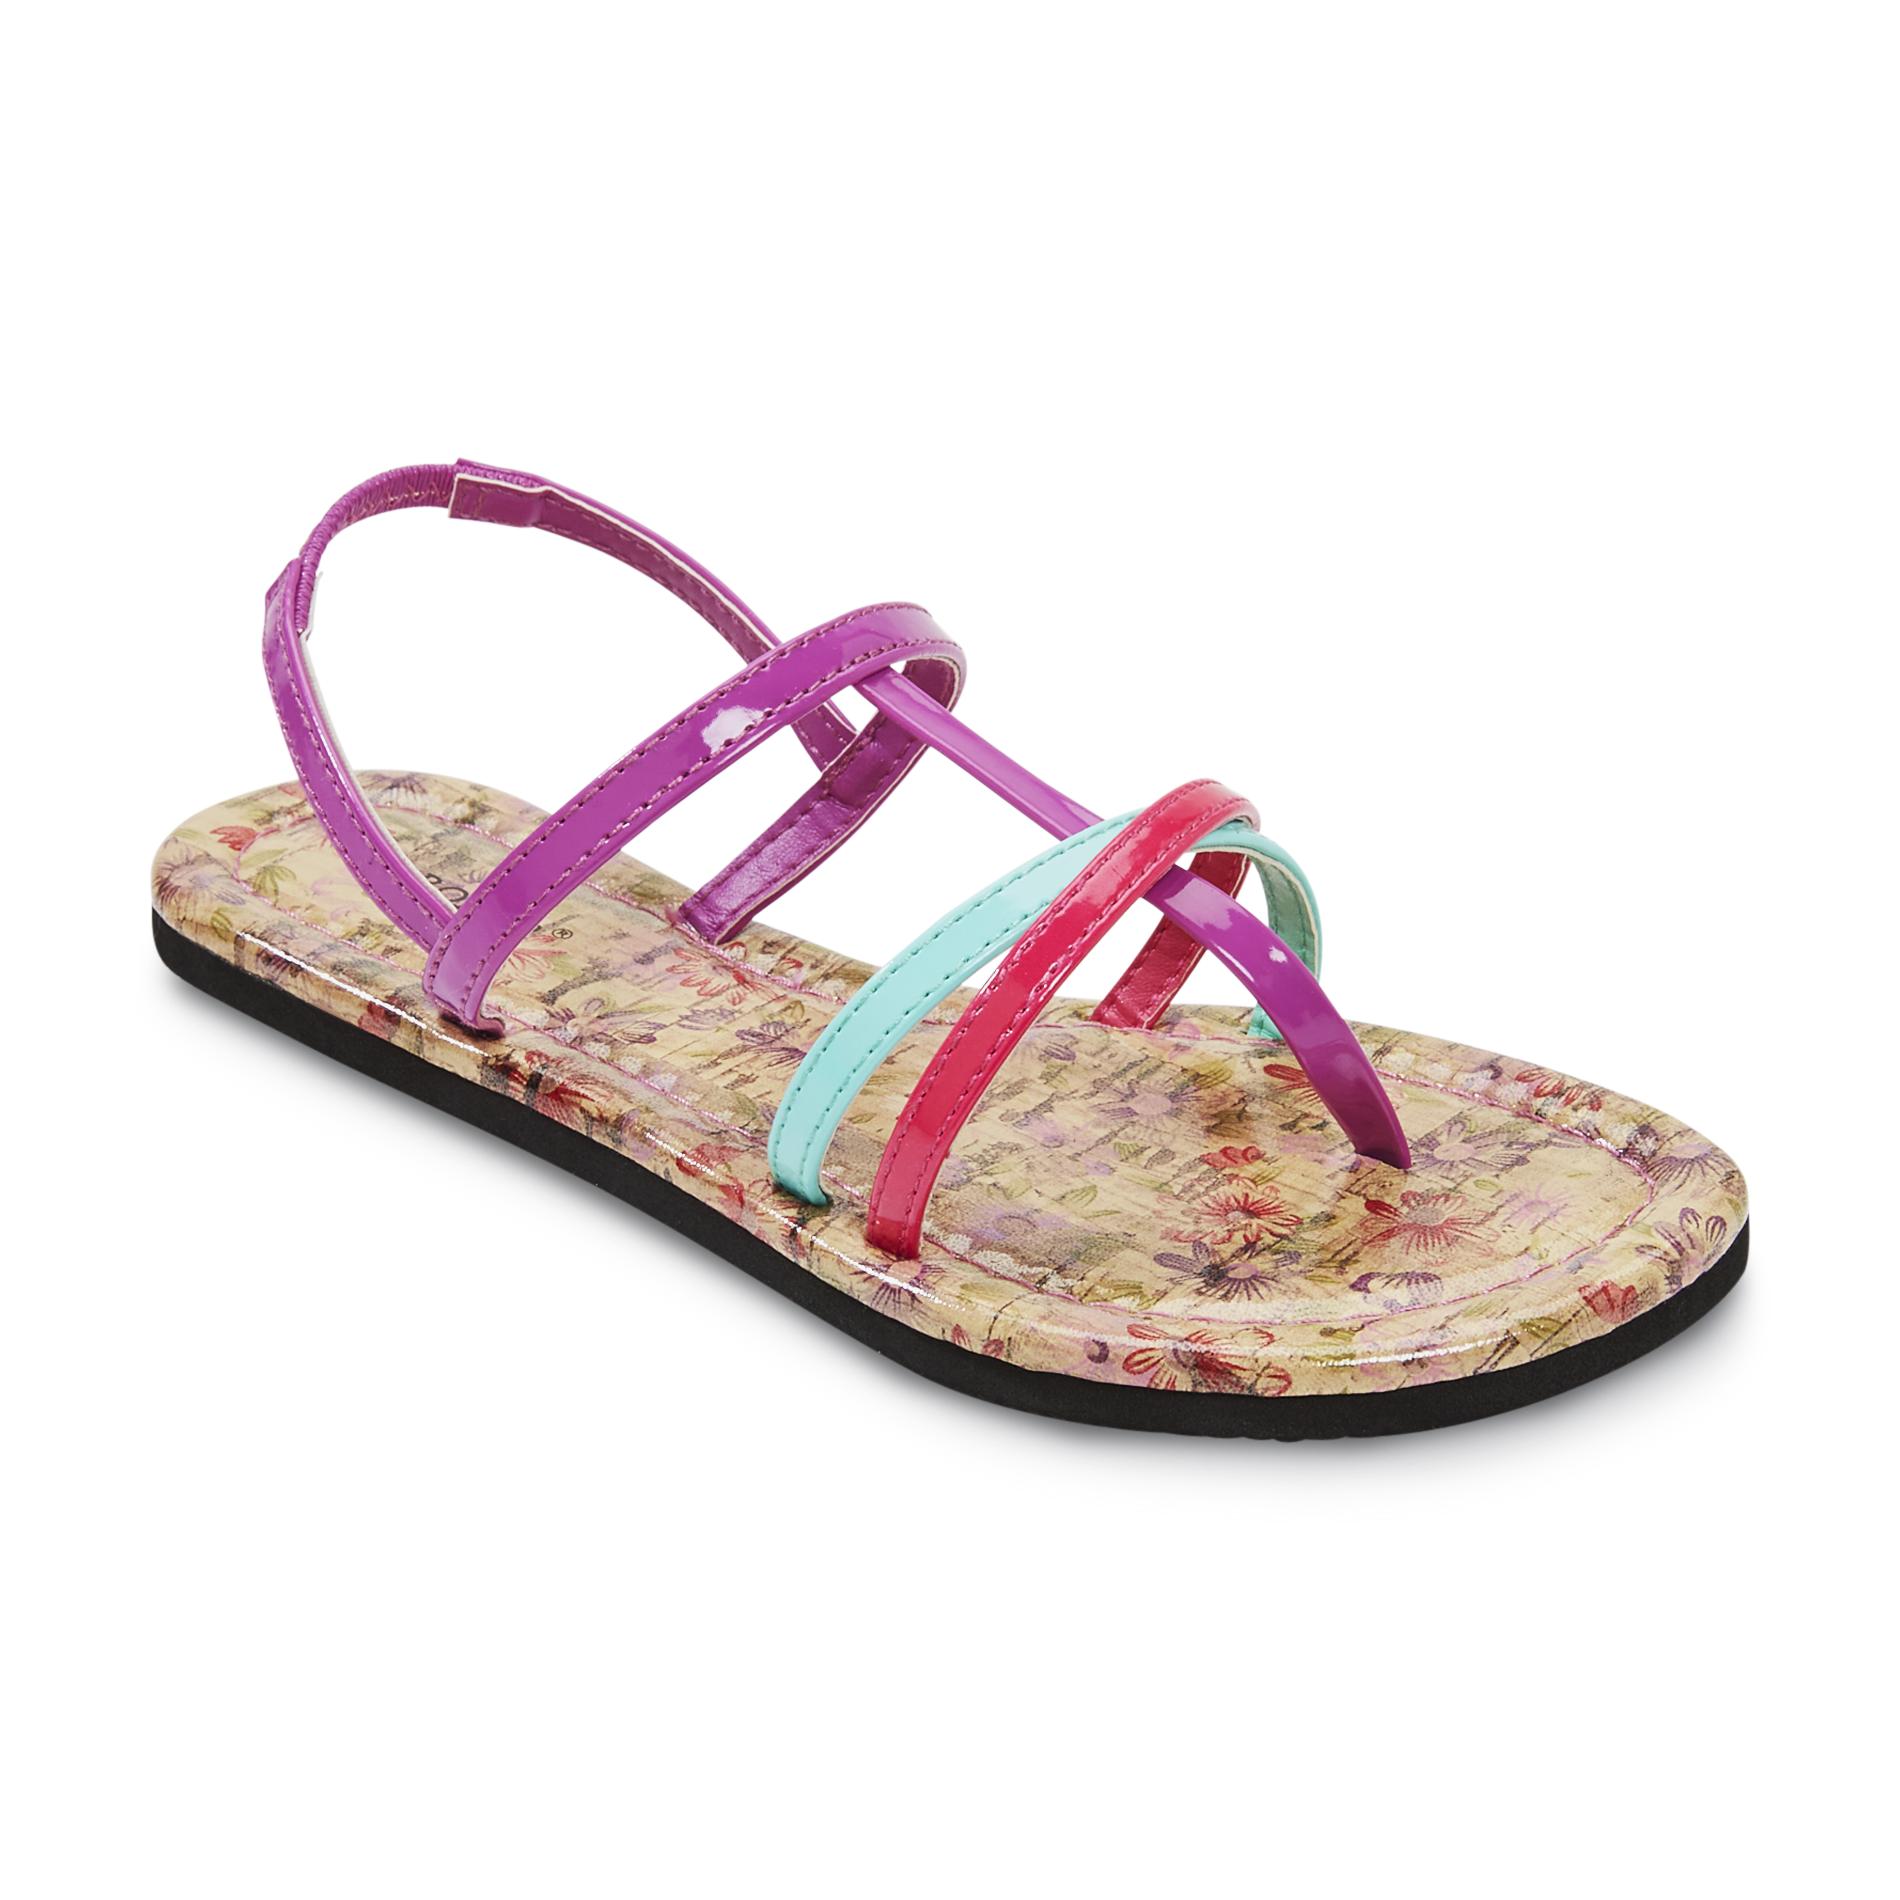 Joe Boxer Girl's Pink/Purple/Turquoise T-Strap Thong Sandals - Floral